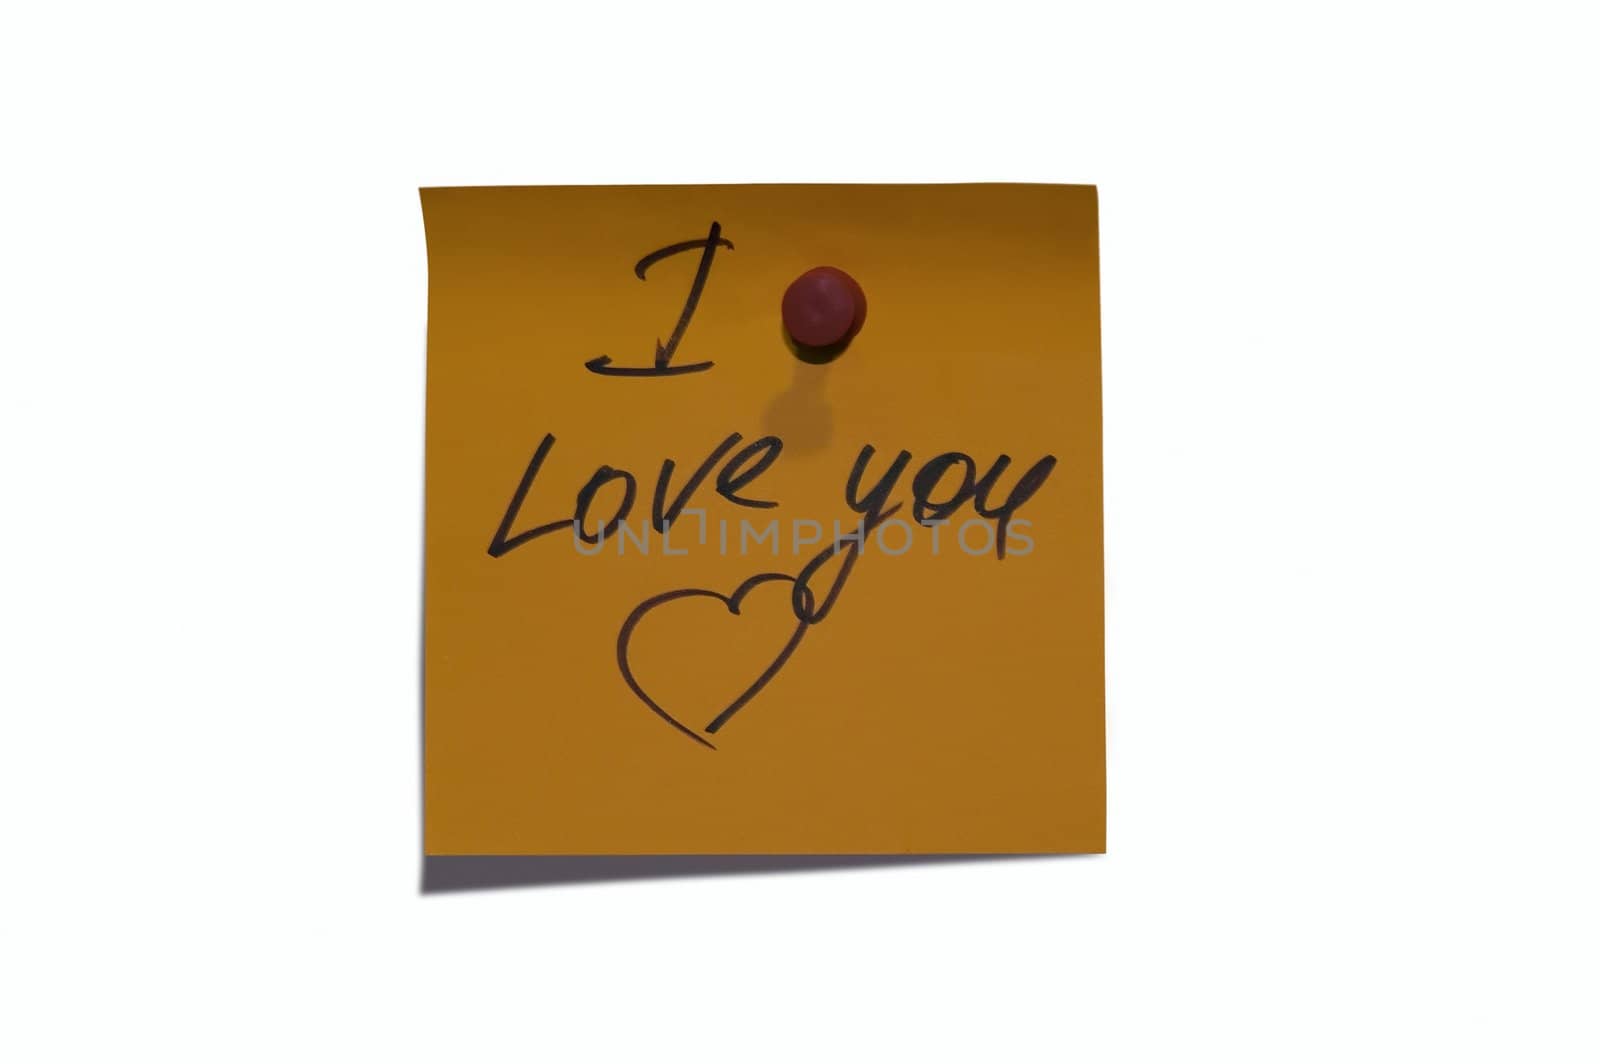 Sticky post it note with "I Love You" wording